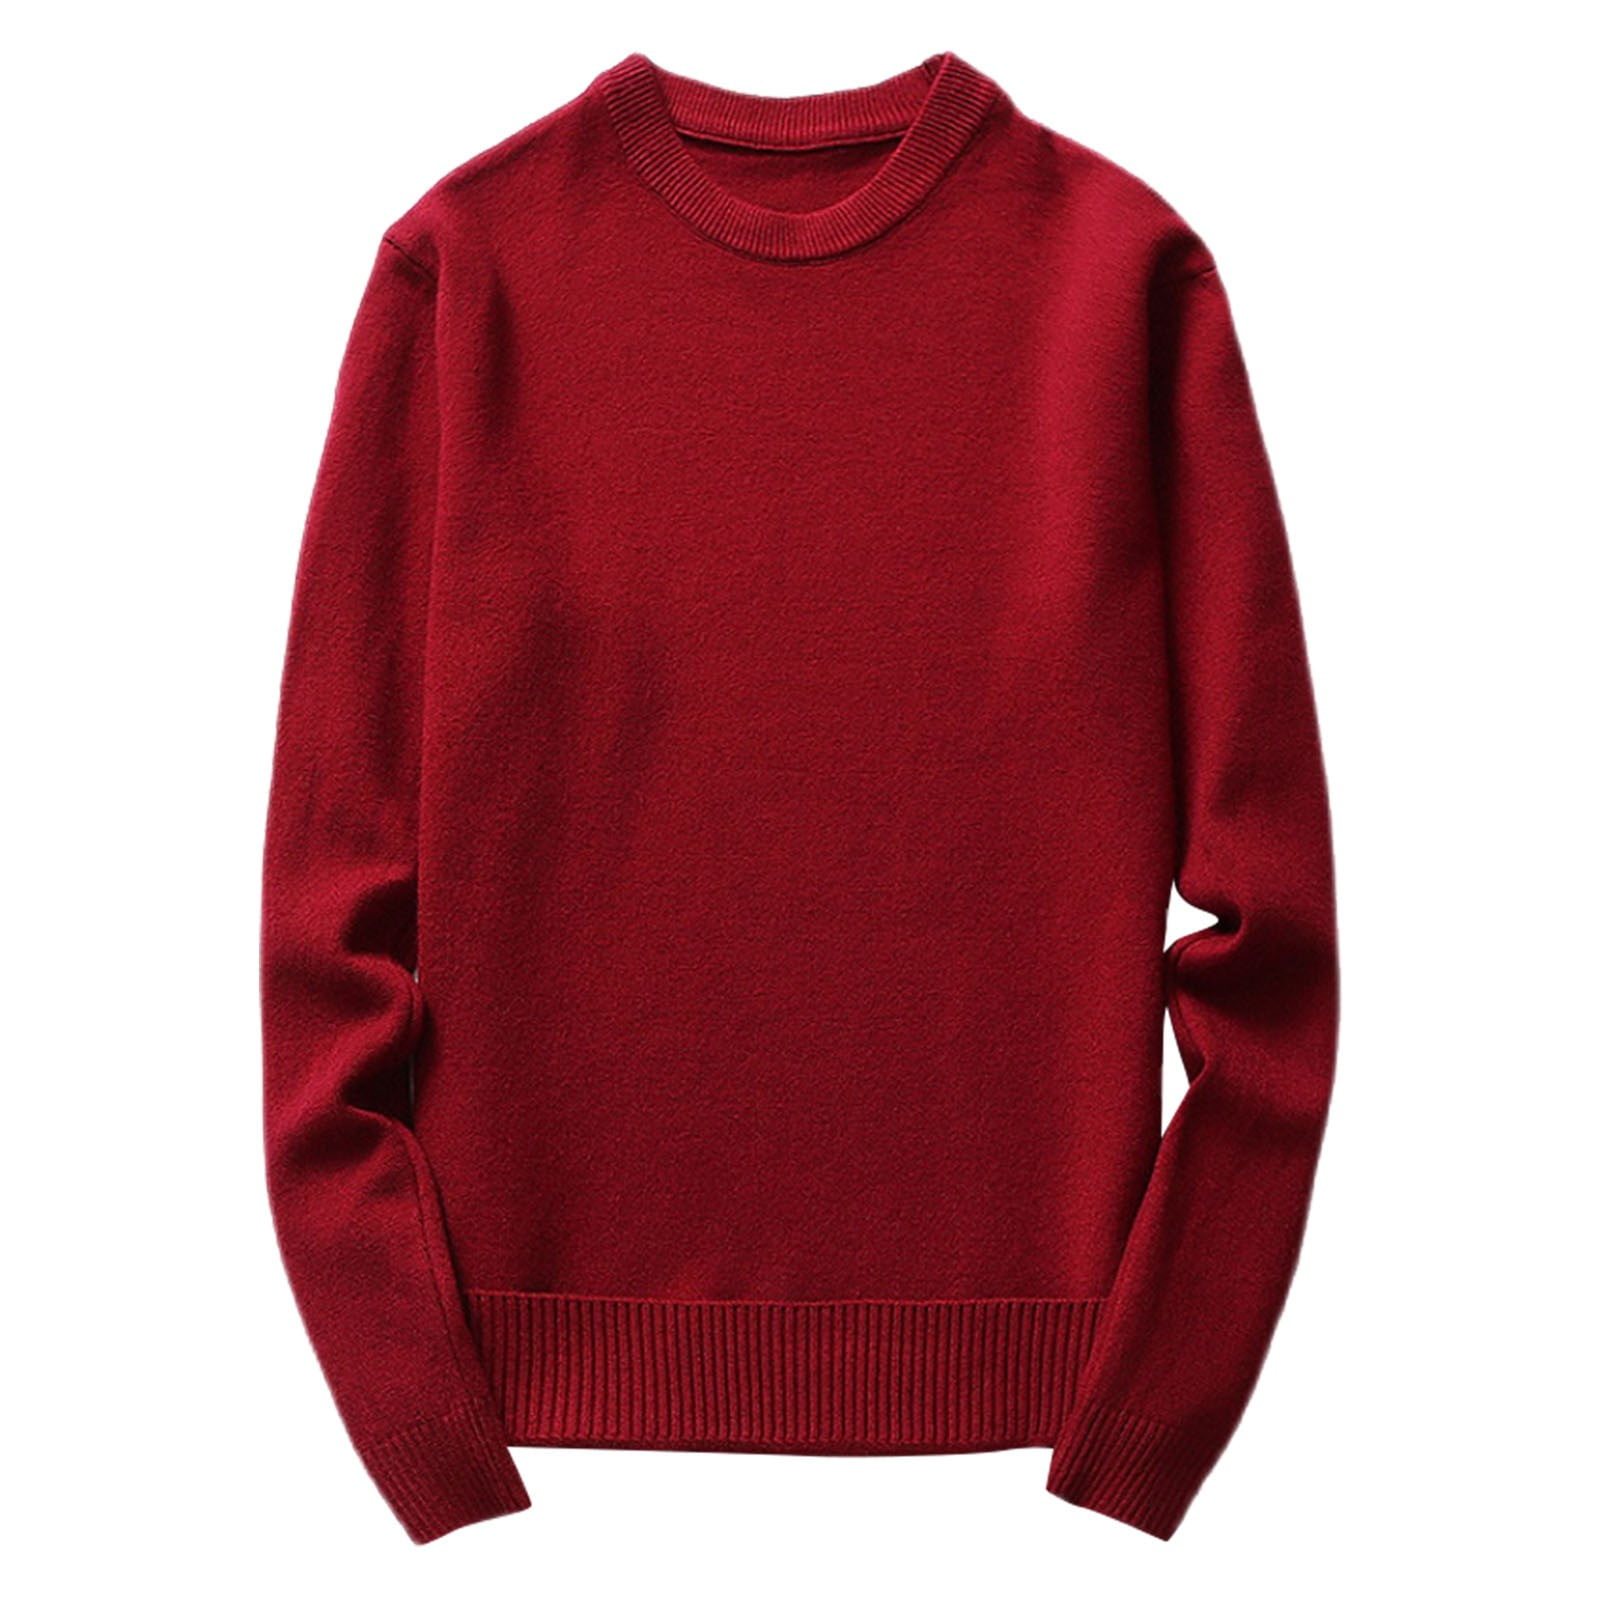 kpoplk Crew Neck Sweaters For Men Ribbed Knit Slim Fit Long Sleeve ...